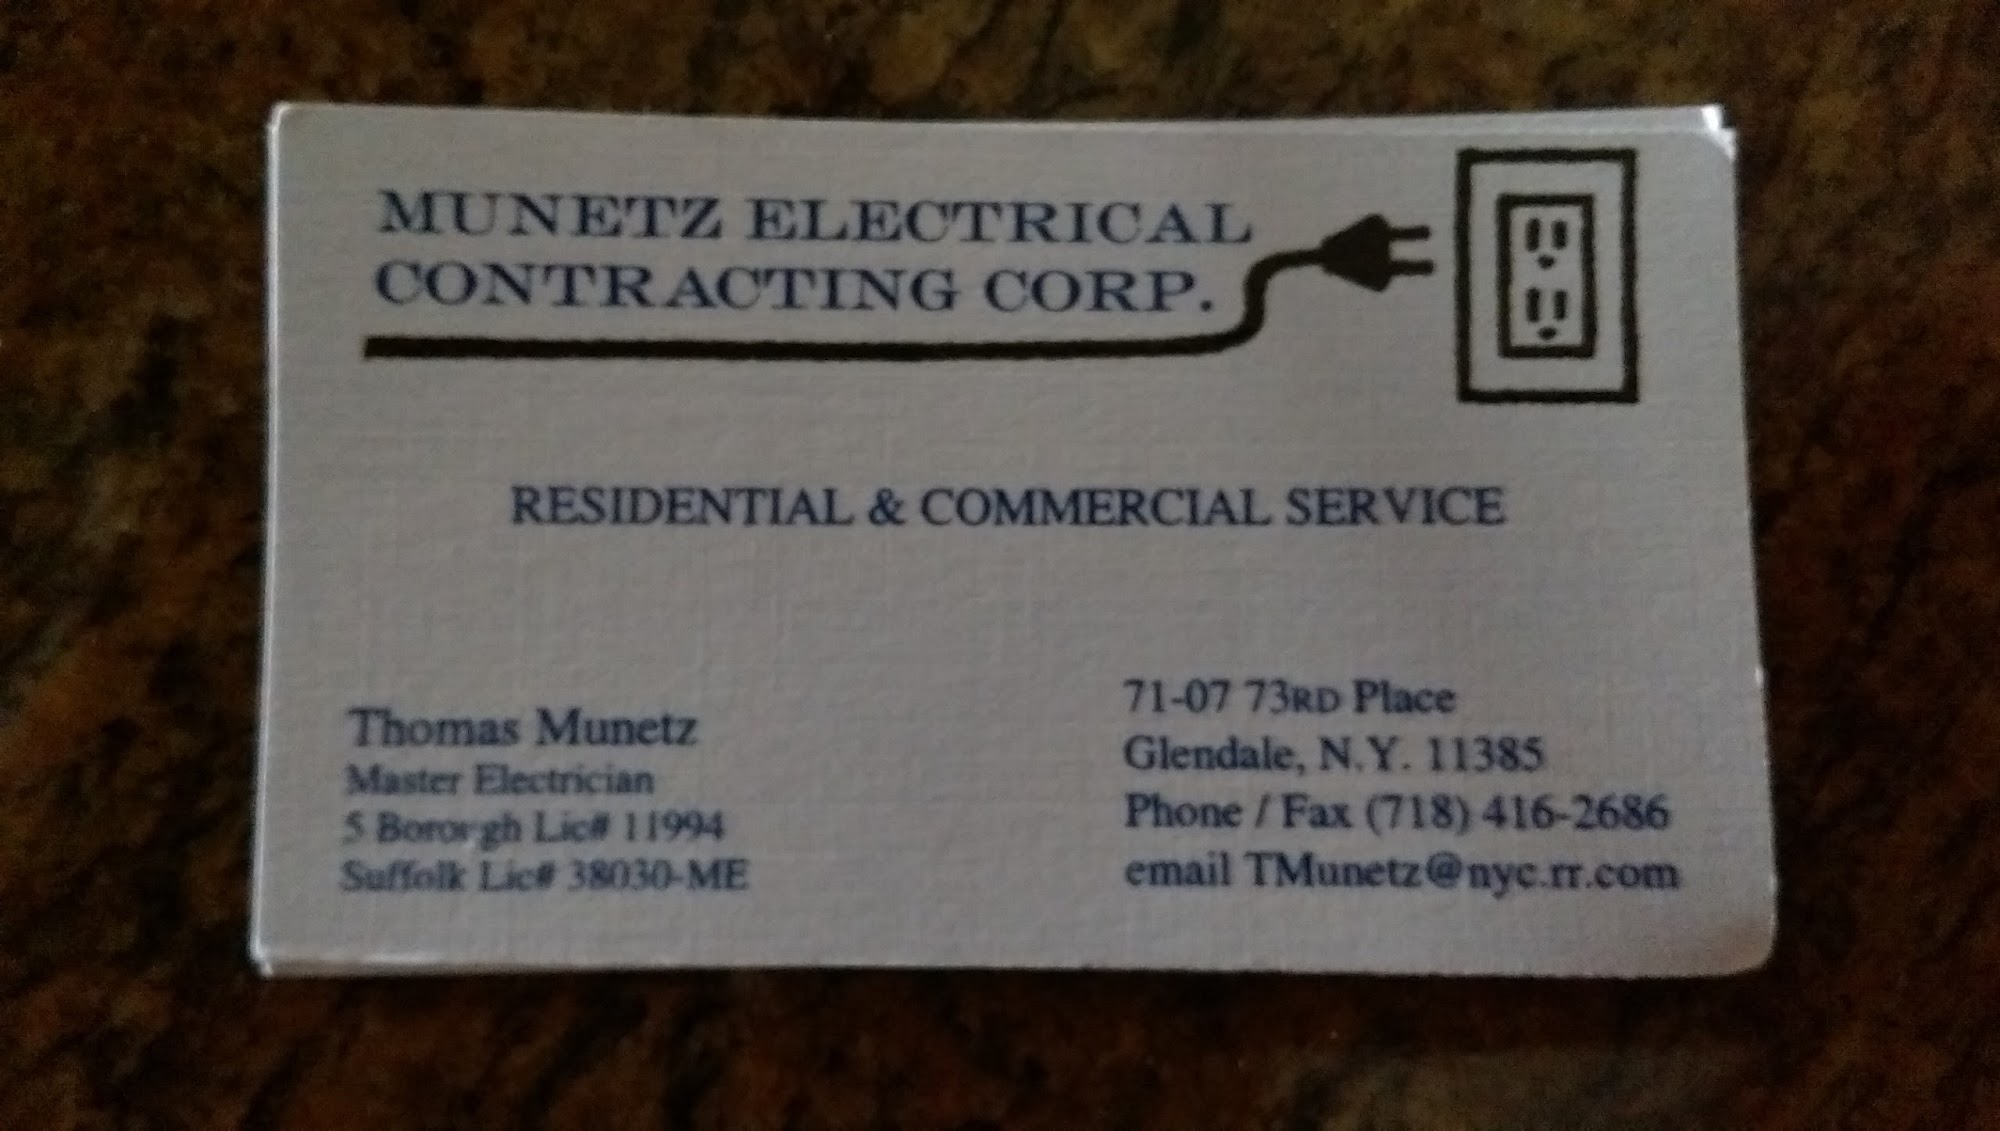 Munetz Electrical Contracting Corporation